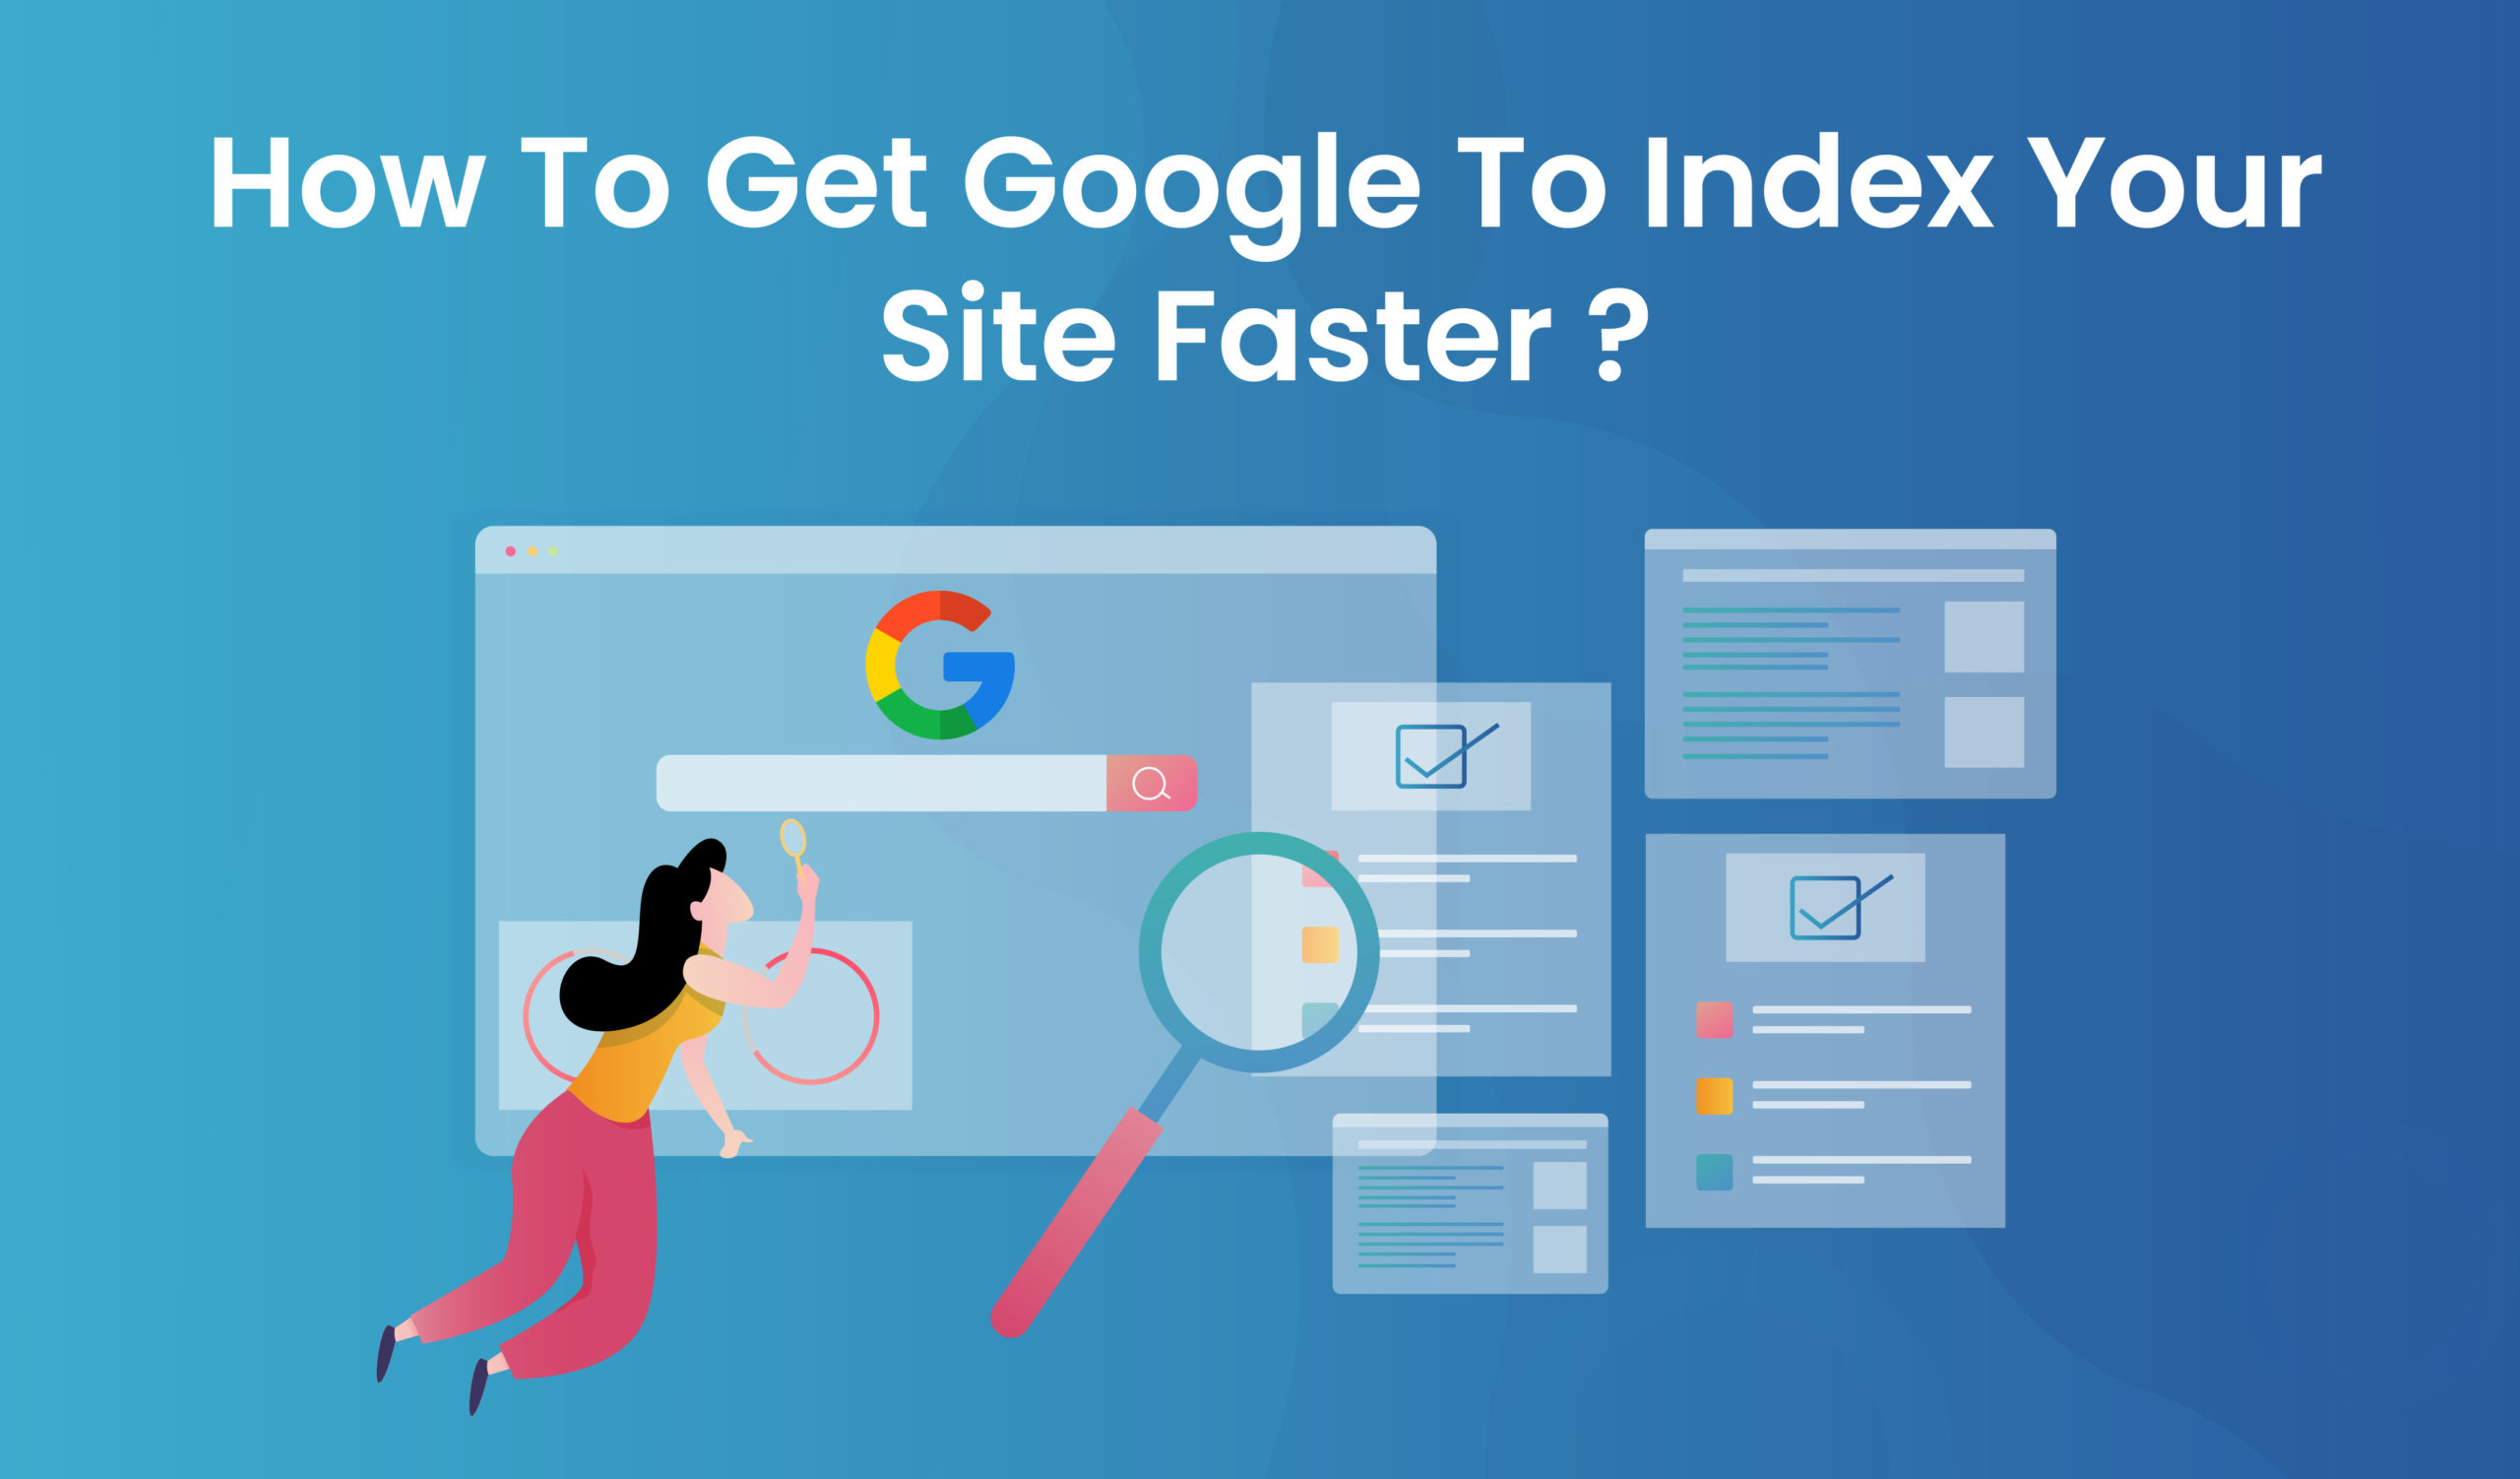 How to get Google to Index your site faster?